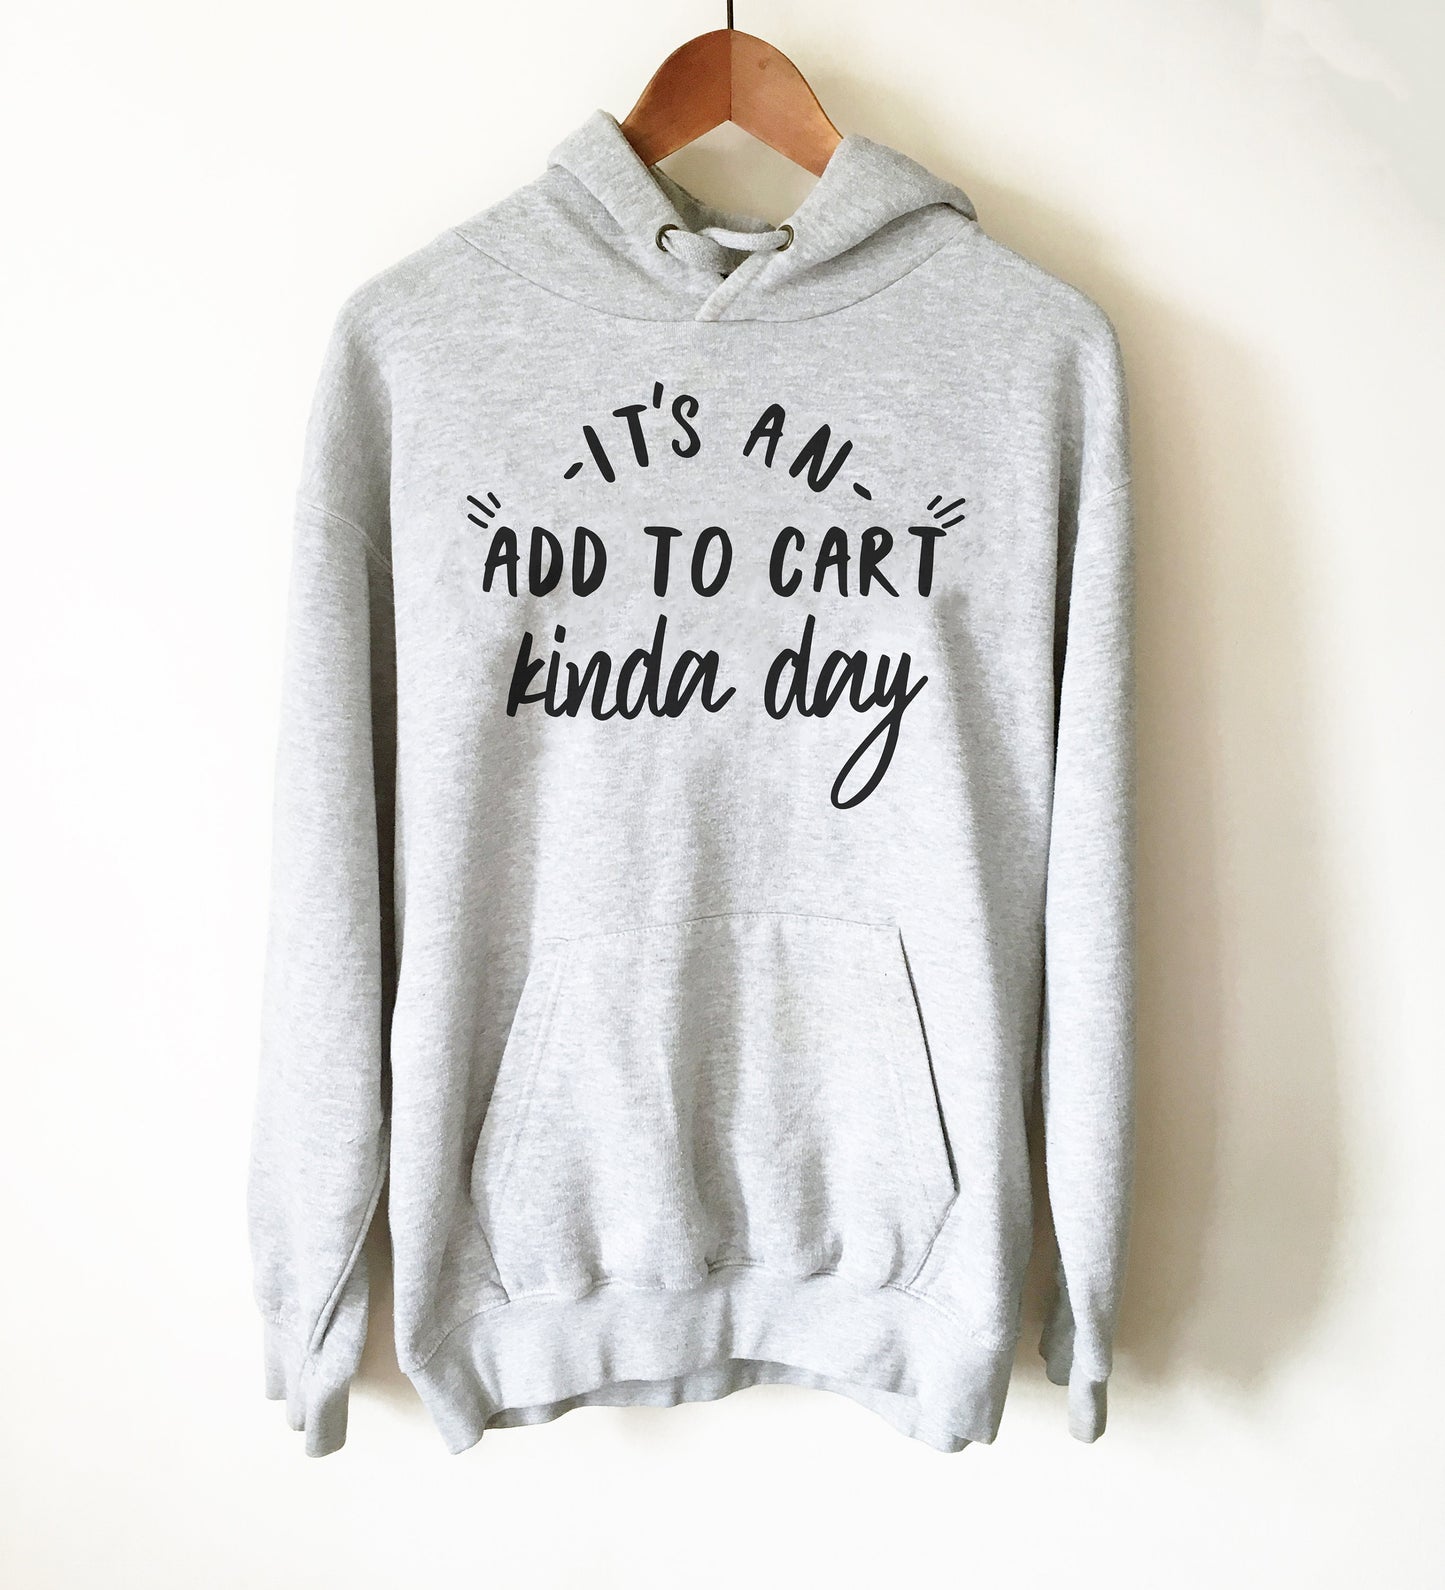 It’s An Add To Cart Kinda Day Hoodie - Shopping Shirt, Shopping Gift, Shopaholic Shirt, Shopaholic Gift, Black Friday Shirt